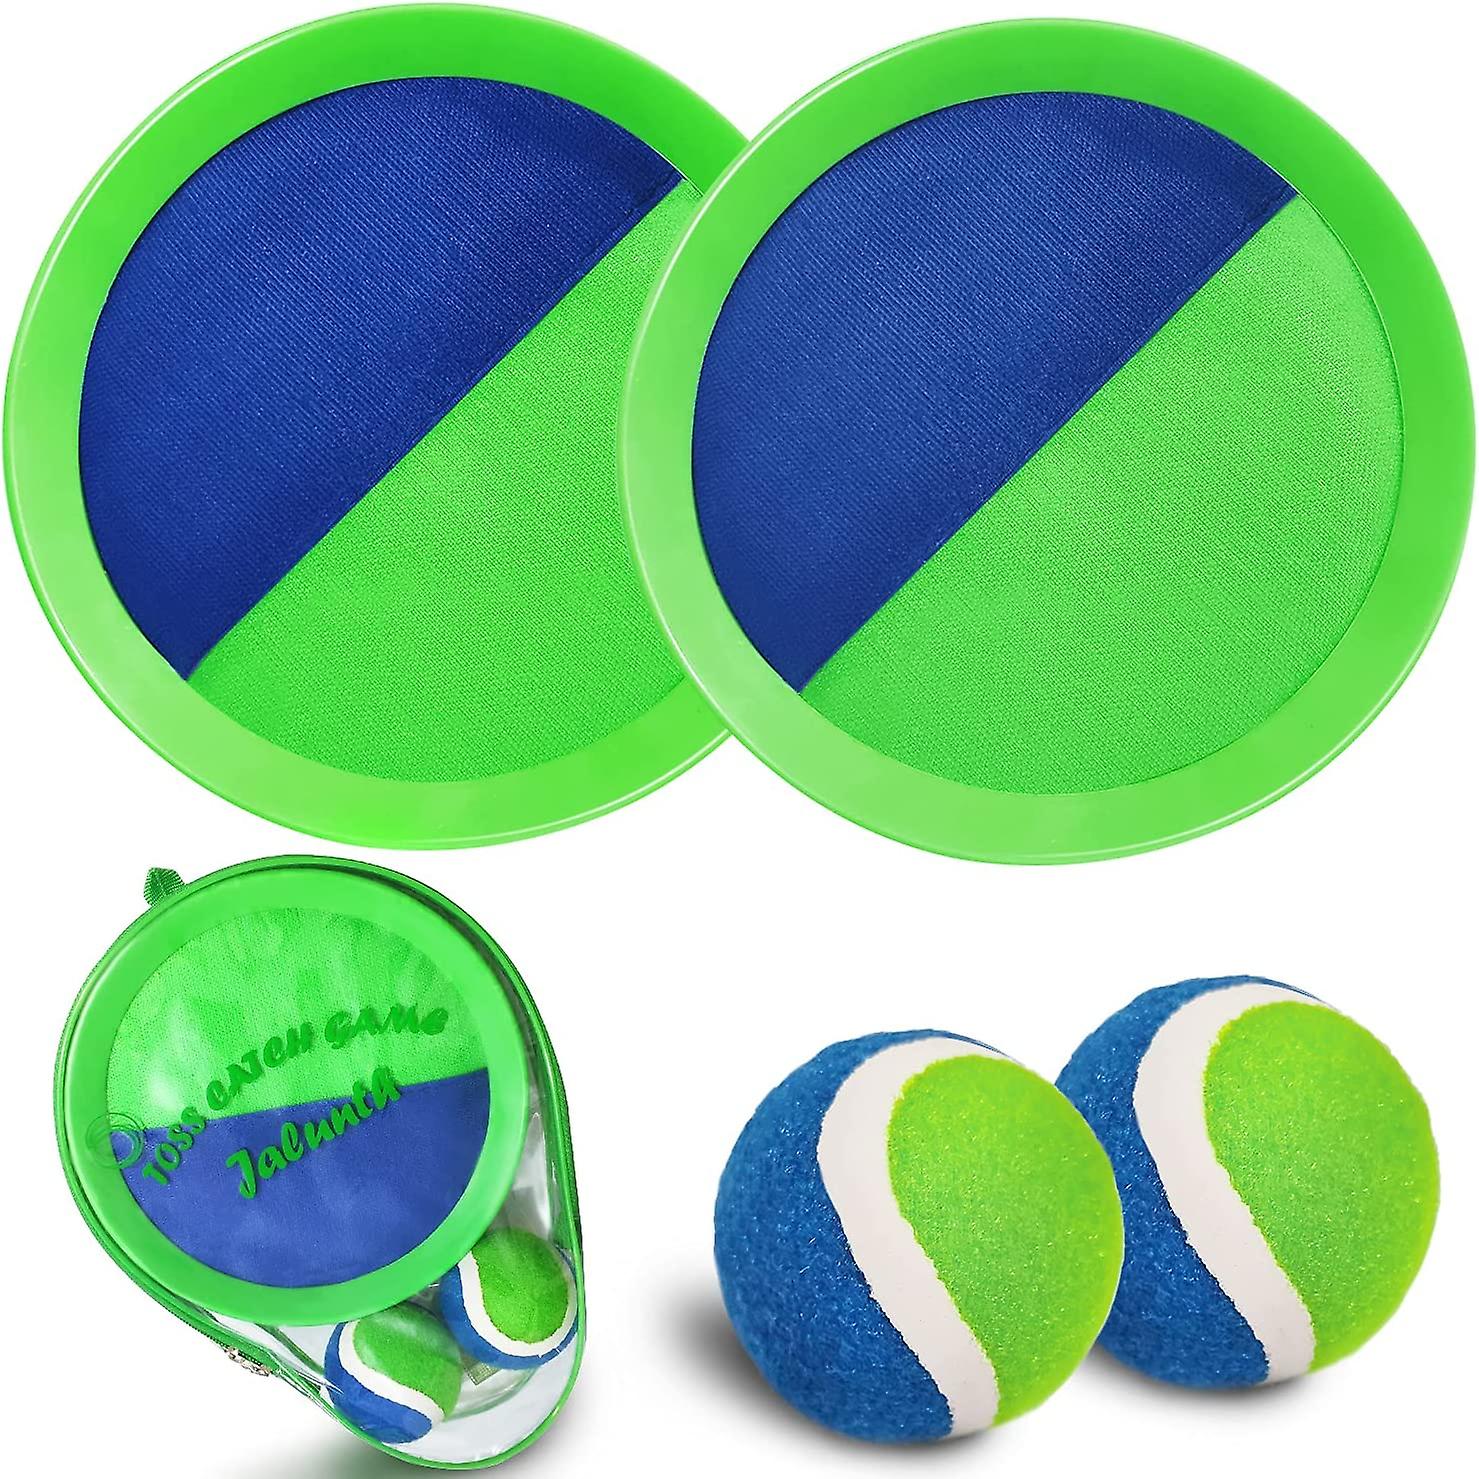 Ball Catch Set Games Toss Paddle - Beach Toys Back Yard Outdoor Lawn Backyard Throw Sticky Set Age 3 4 5 6 7 8 9 10 11 12 Years Old Boys Girls Kids Ad